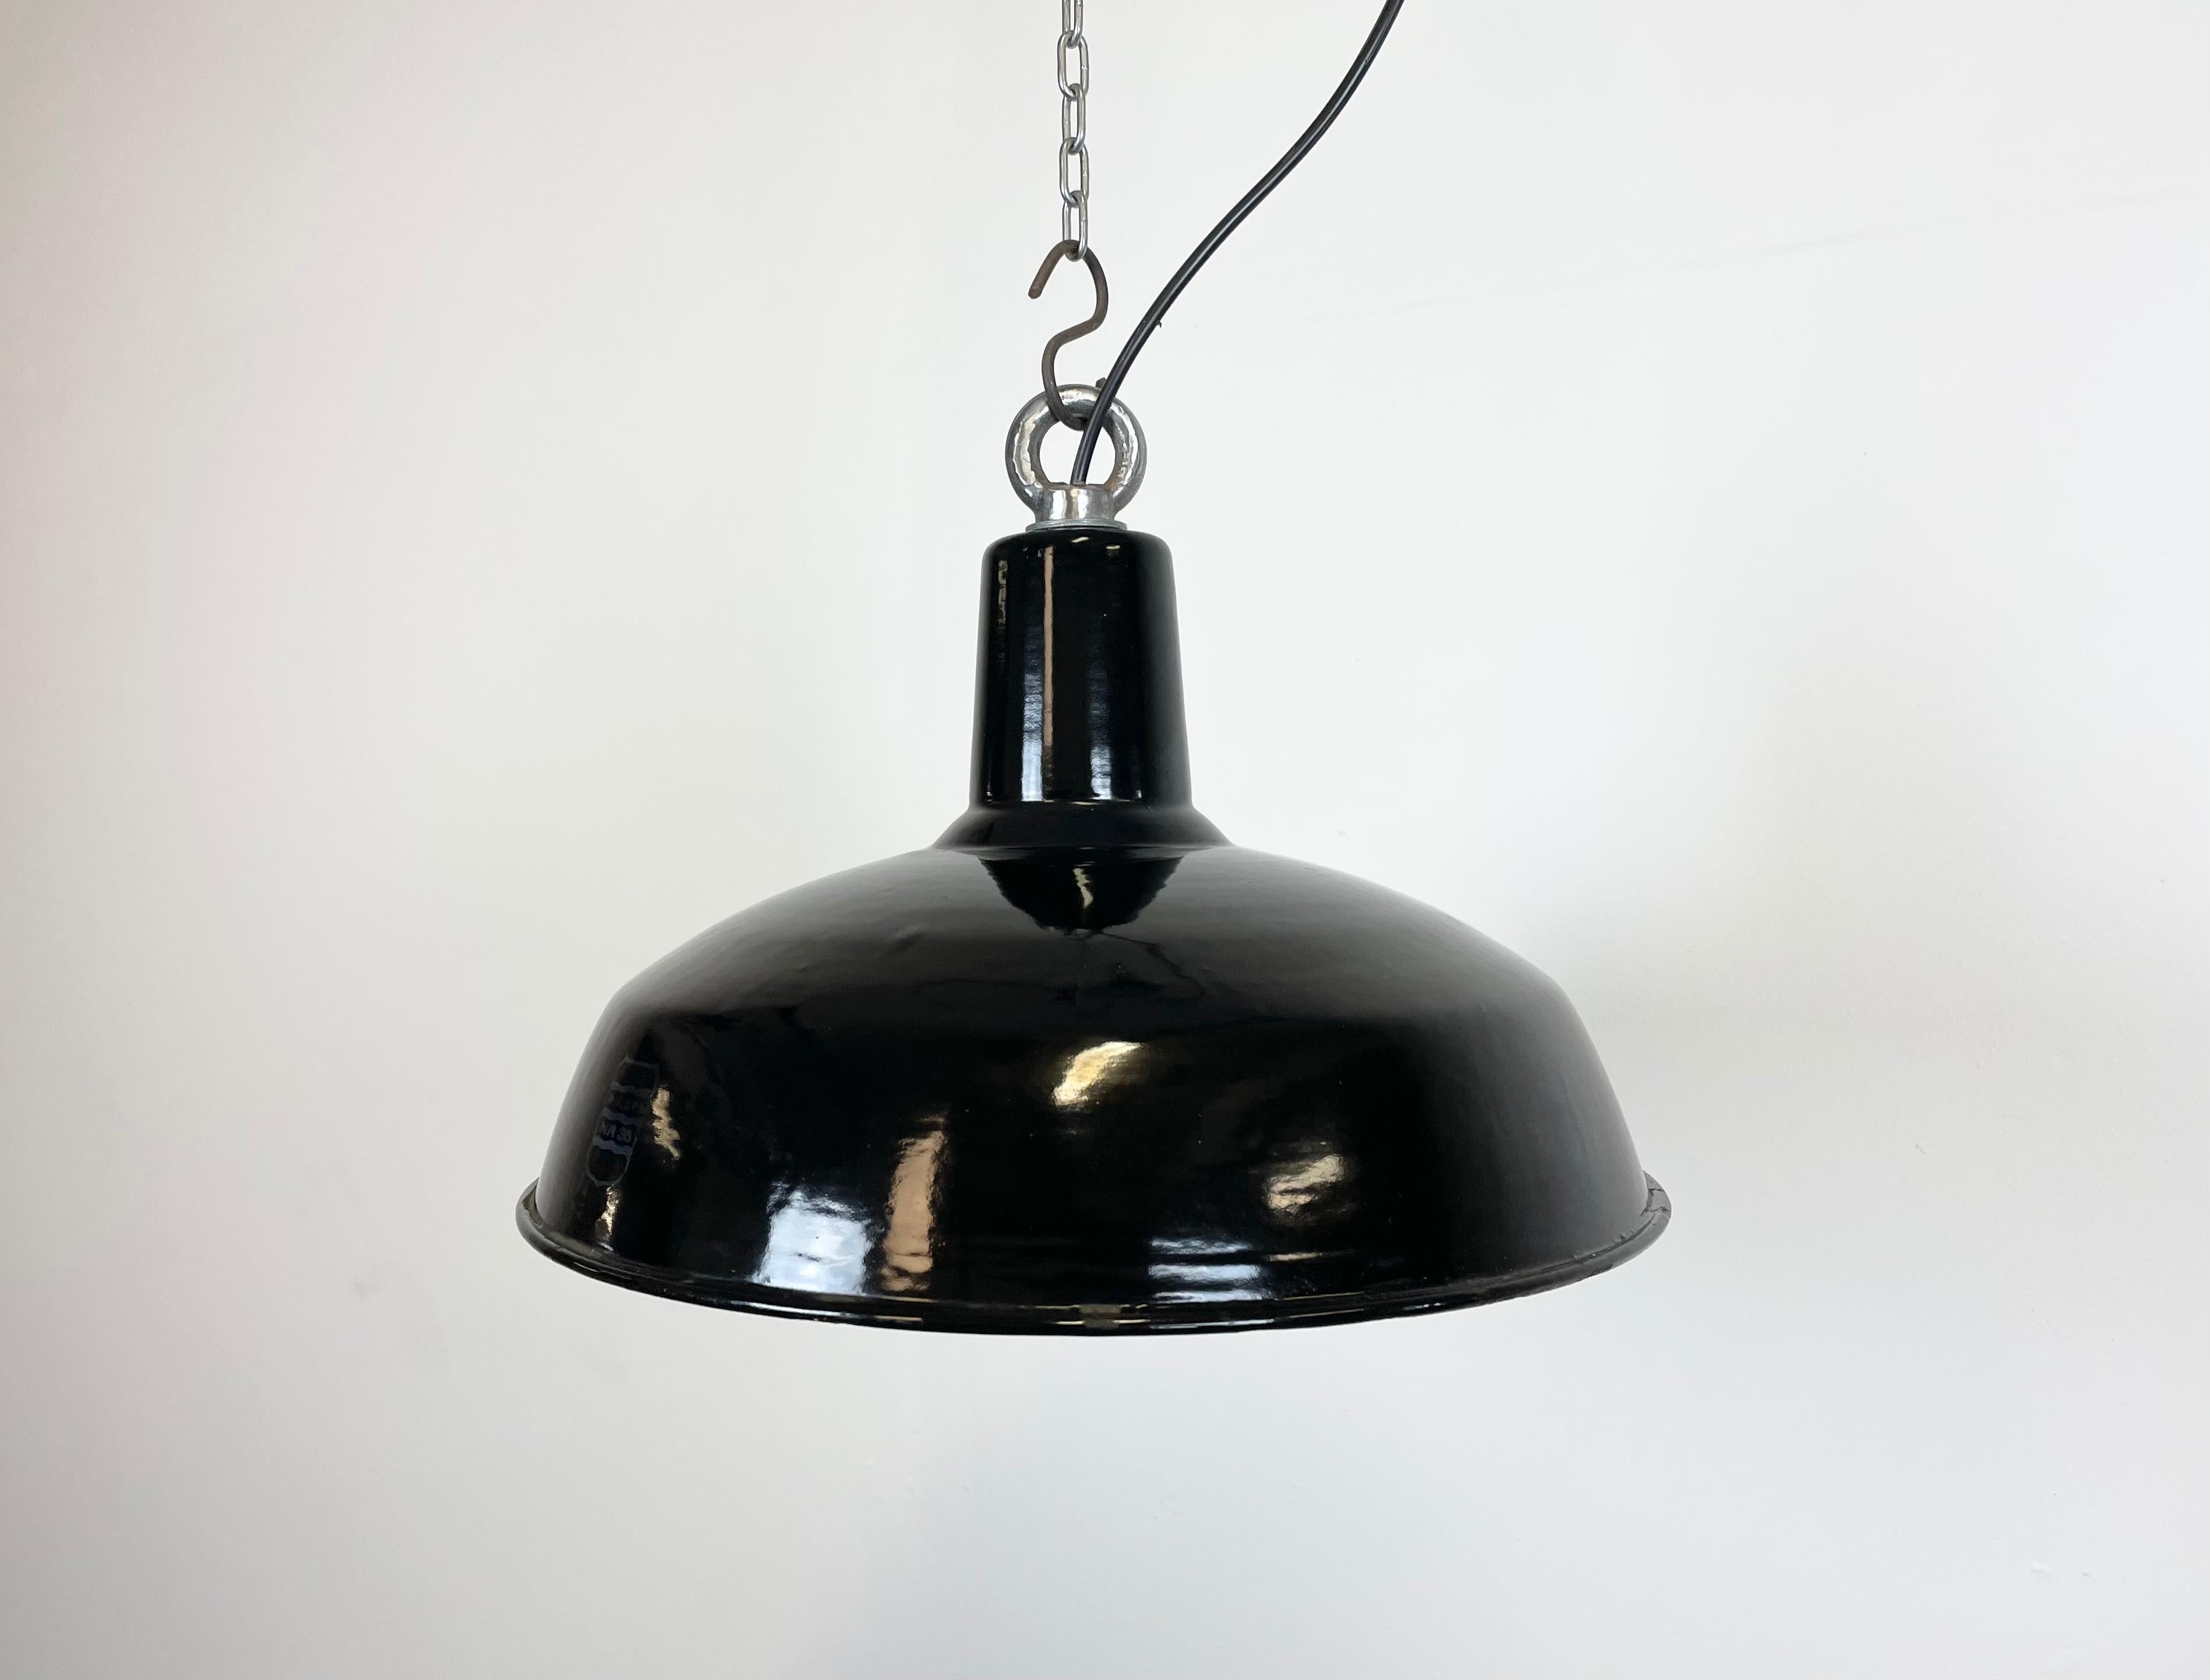 - Vintage Industrial factory lamp from the 1950s 
- Made by Phillips in Netherlands
- Black enamel shade with white enamel interior
- Iron top 
- Socket requires E 27 lightbulbs 
- New wire 
- Lampshade diameter: 36 cm
- Weight : 1,3 kg.
 